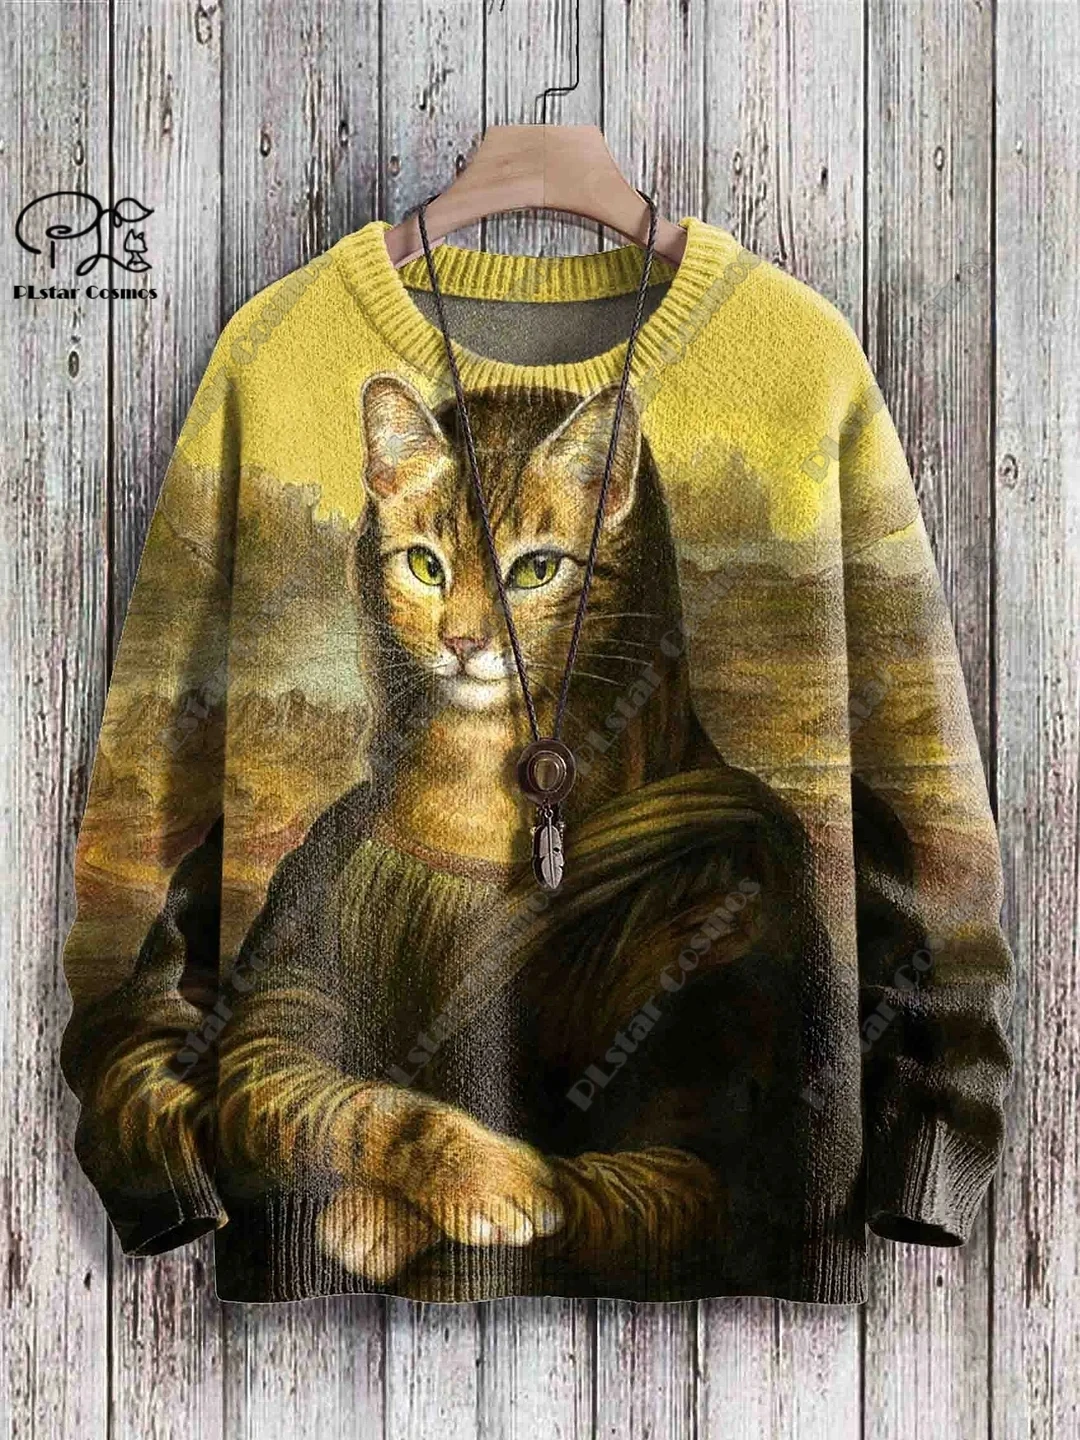 PLstar Cosmos new 3D printed animal series cat pattern ugly sweater street fun casual winter sweater M-6